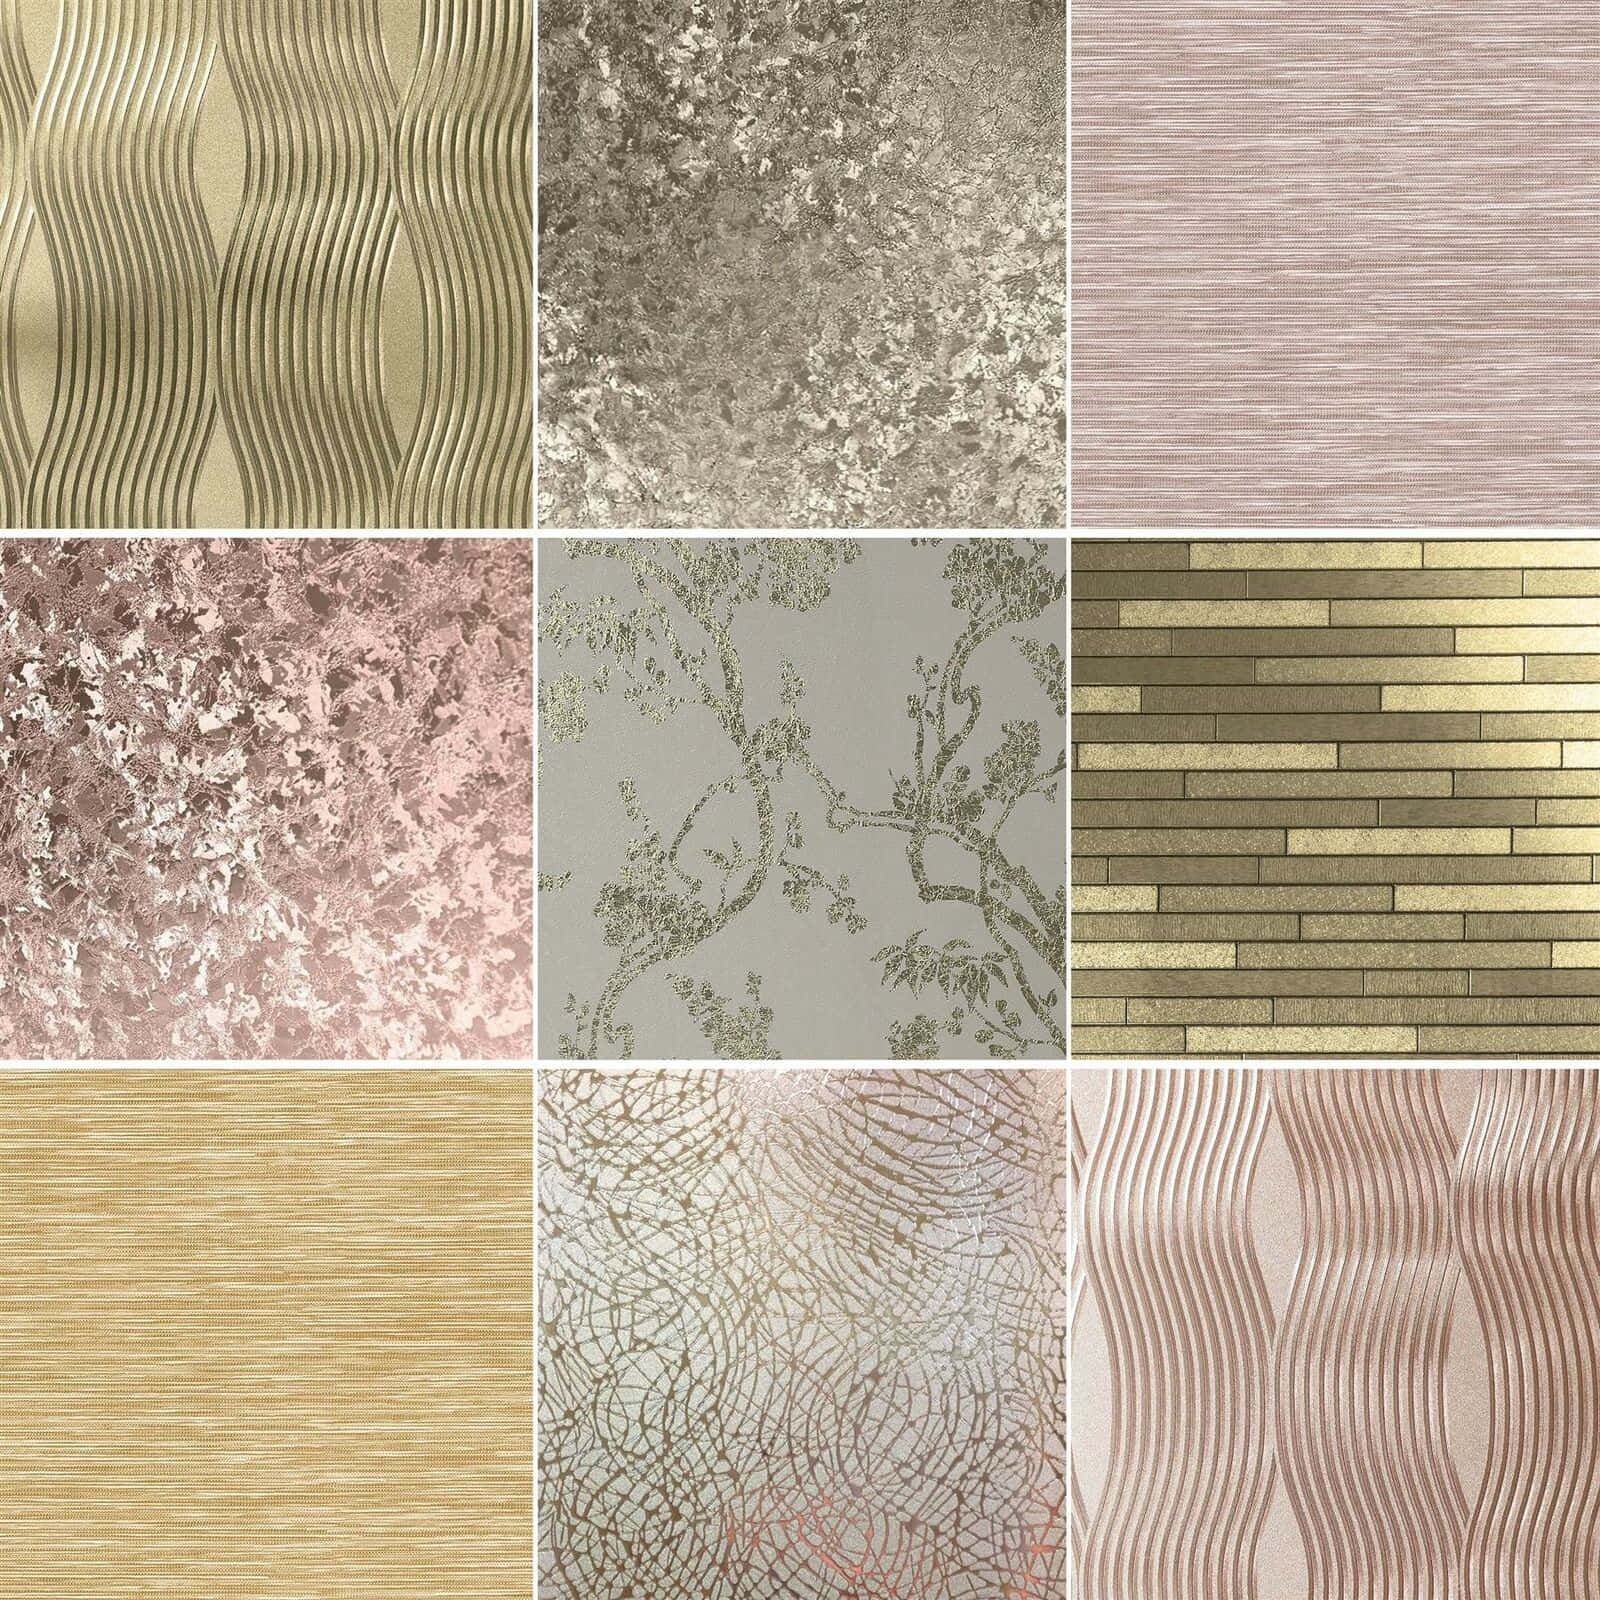 Collage Patterns With Gold Metallic Background